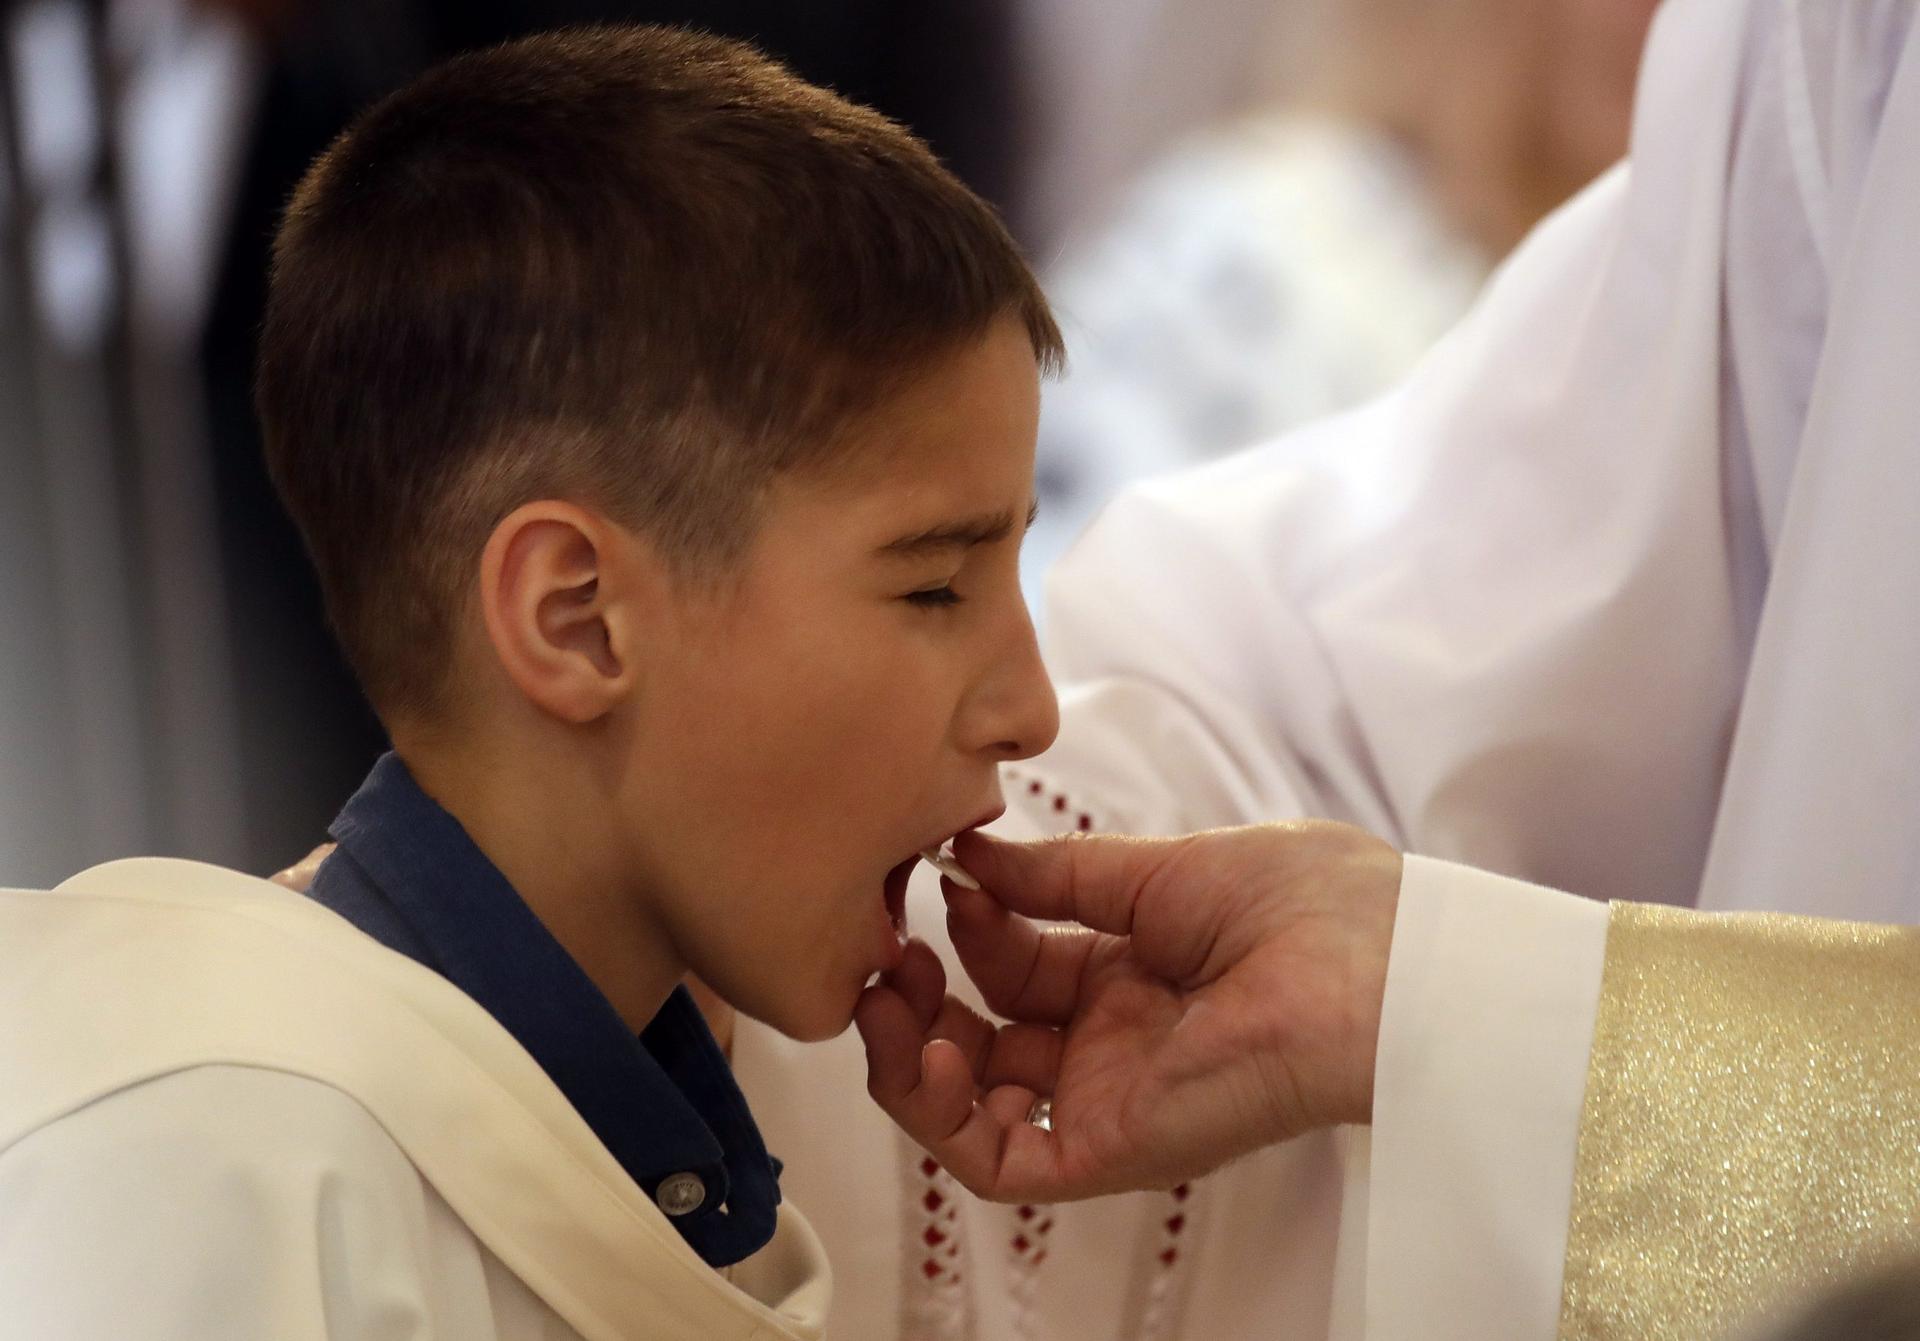 Only half of US Catholics get Church teaching on Communion, study finds